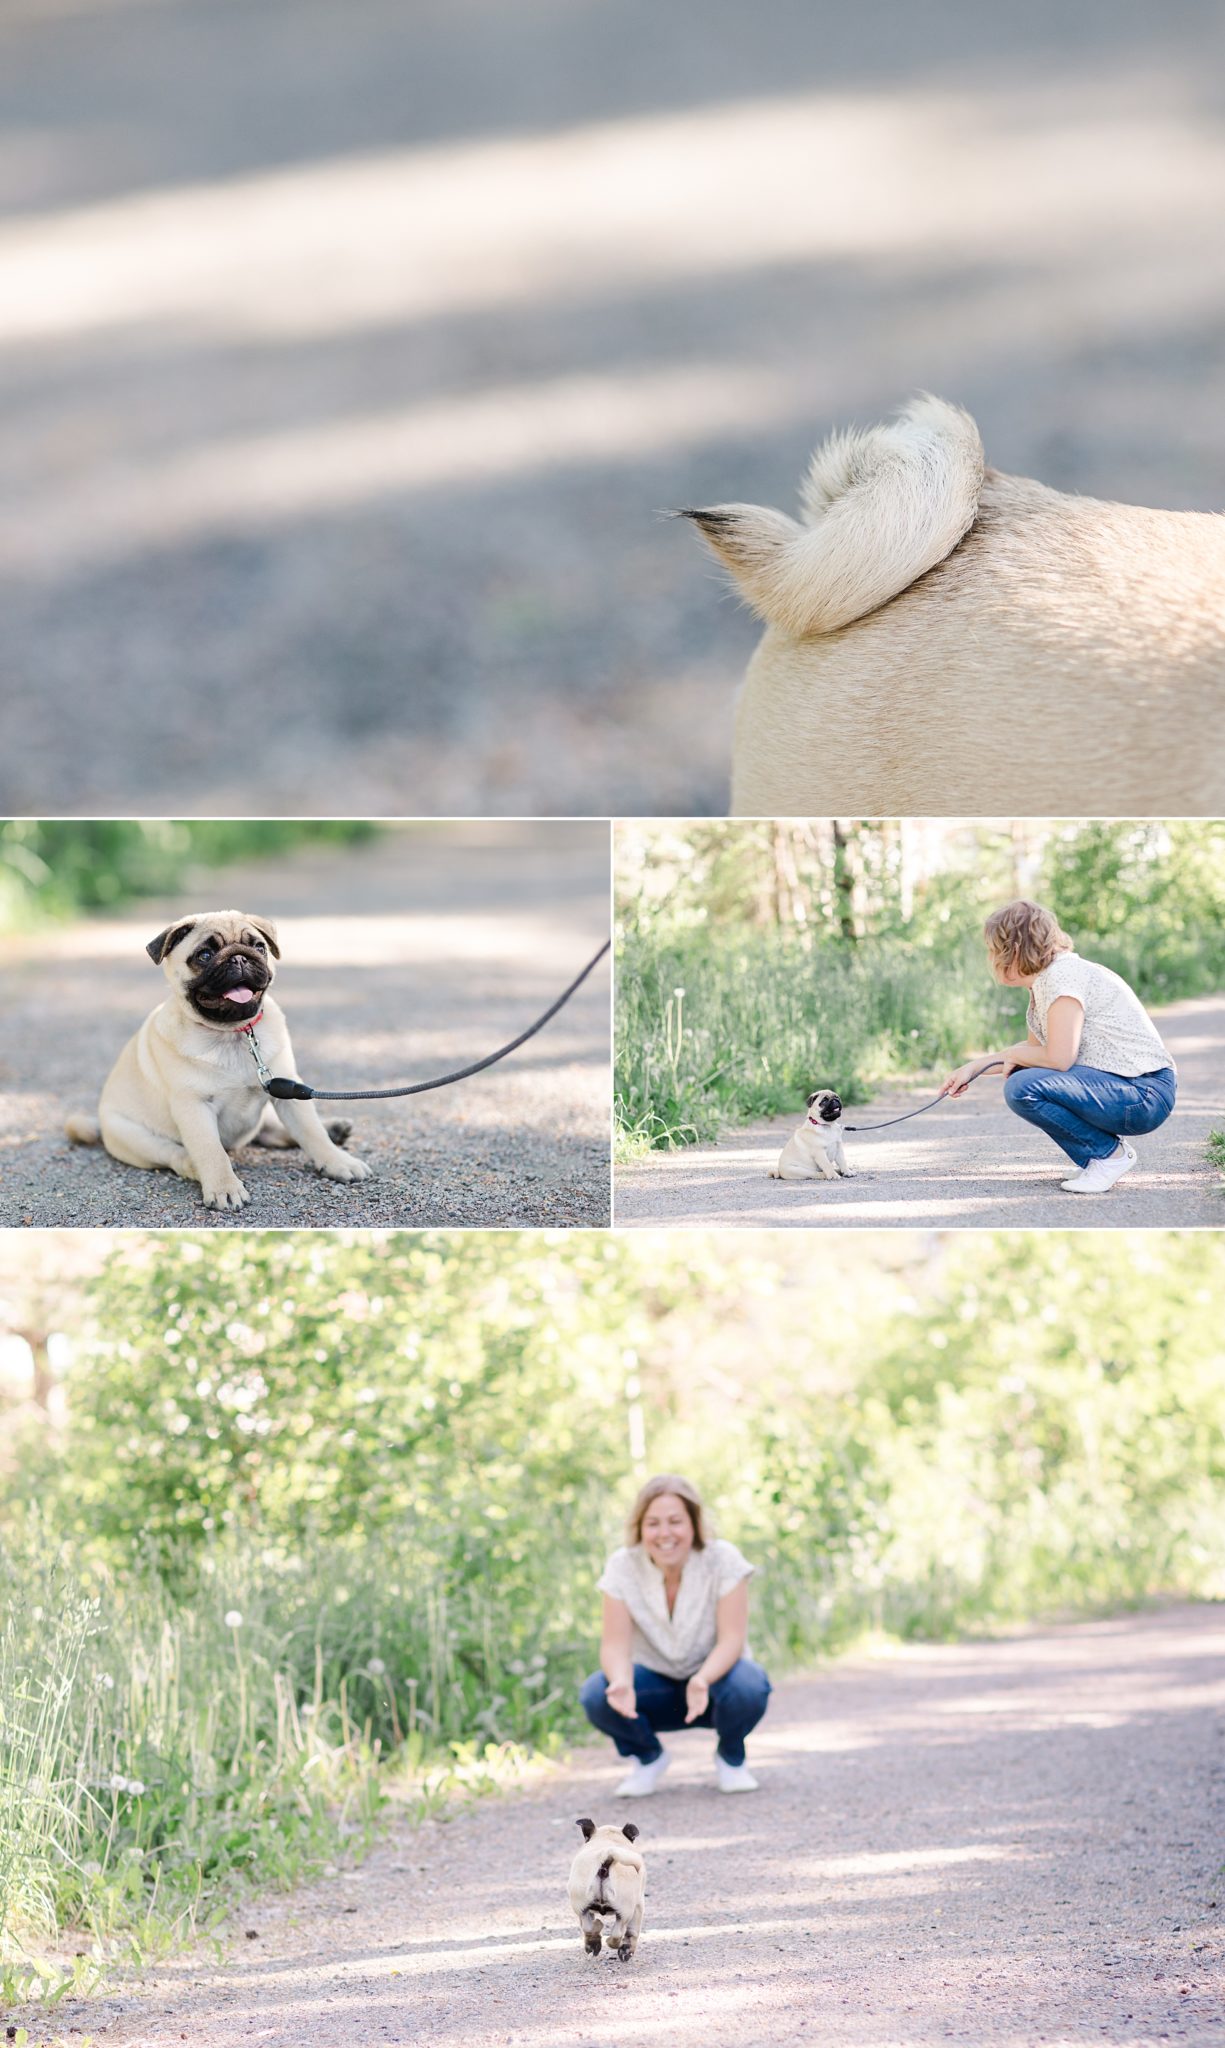 A collage of cute photos of a pug puppy